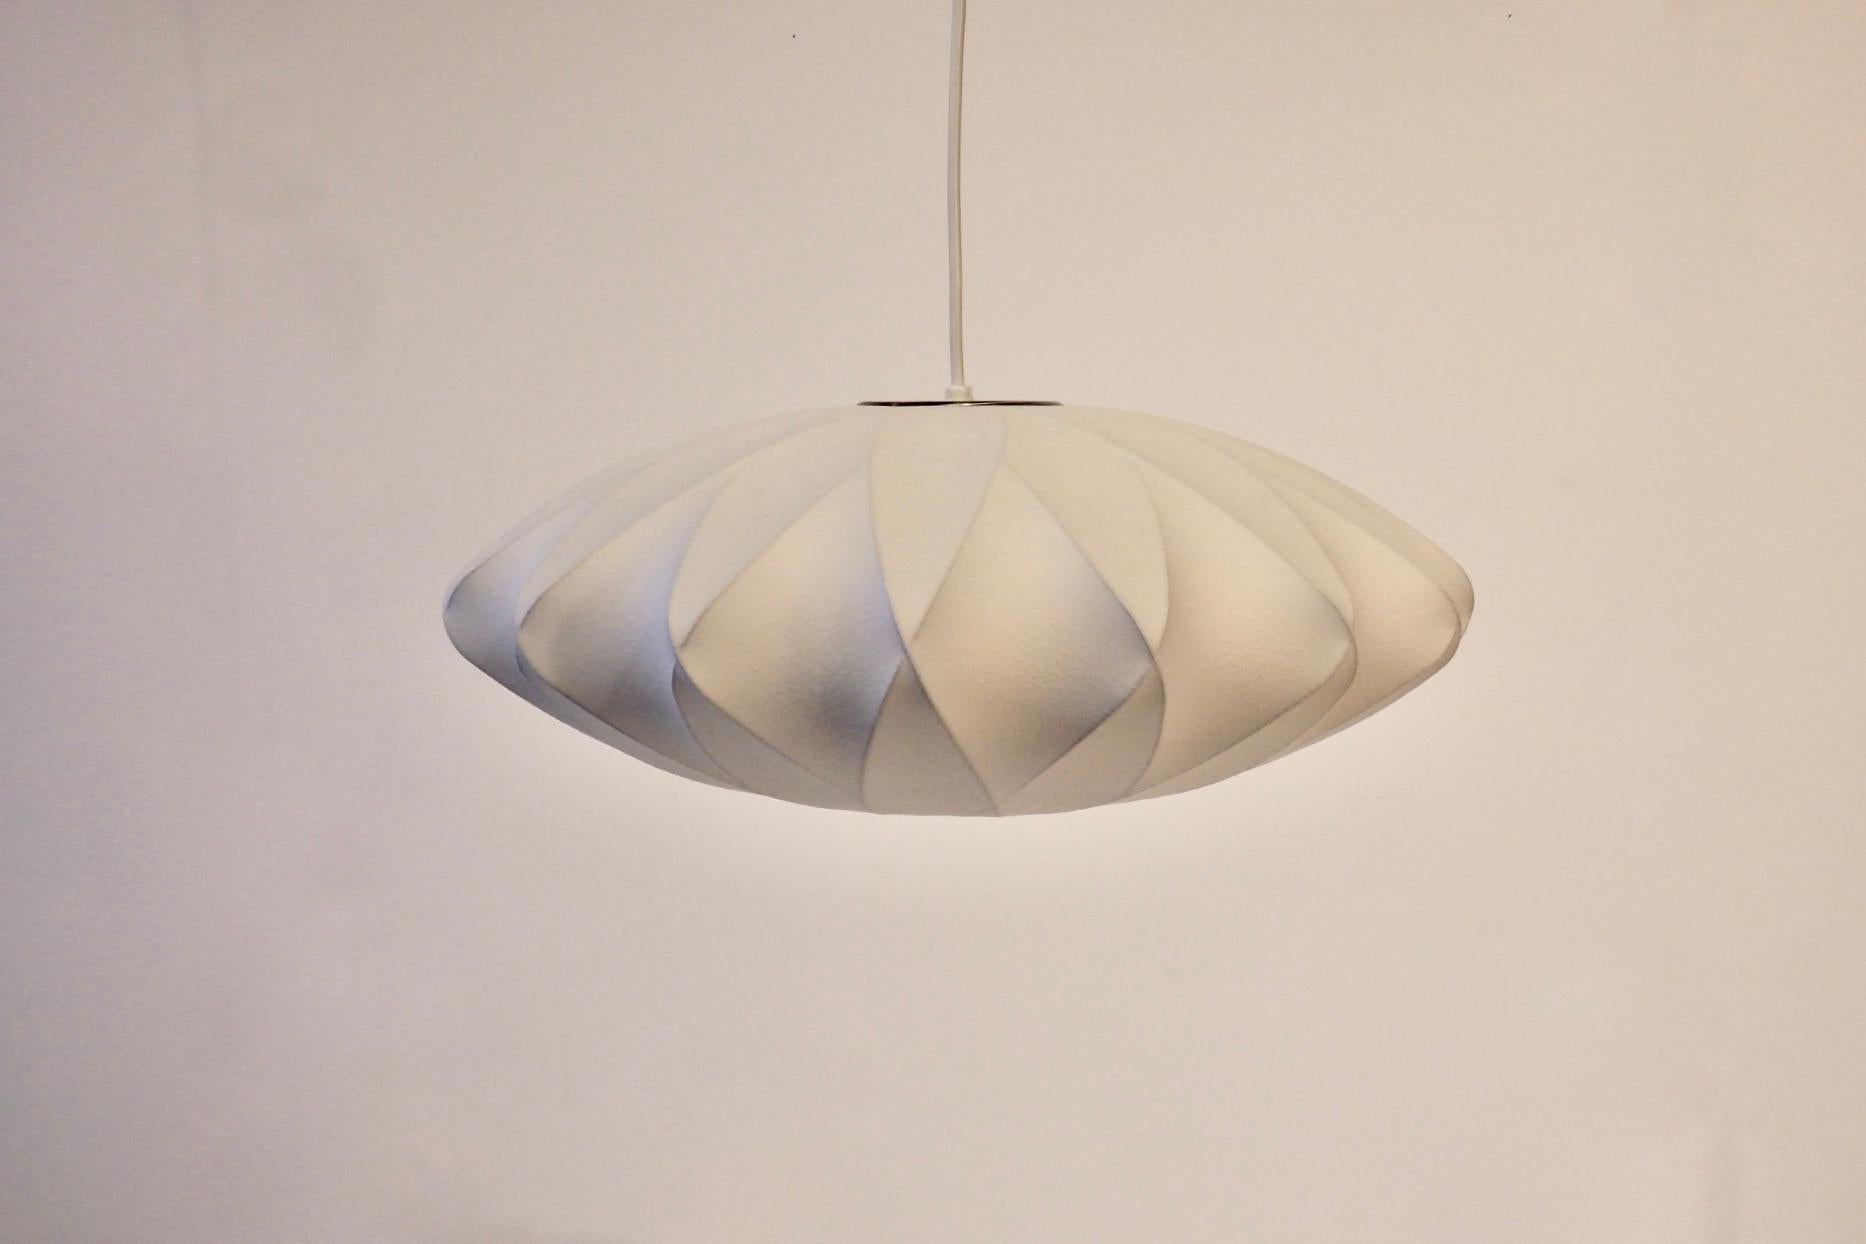 George Nelson criss cross flying saucer hanging bubble lamp. Distributed by Herman Miller.